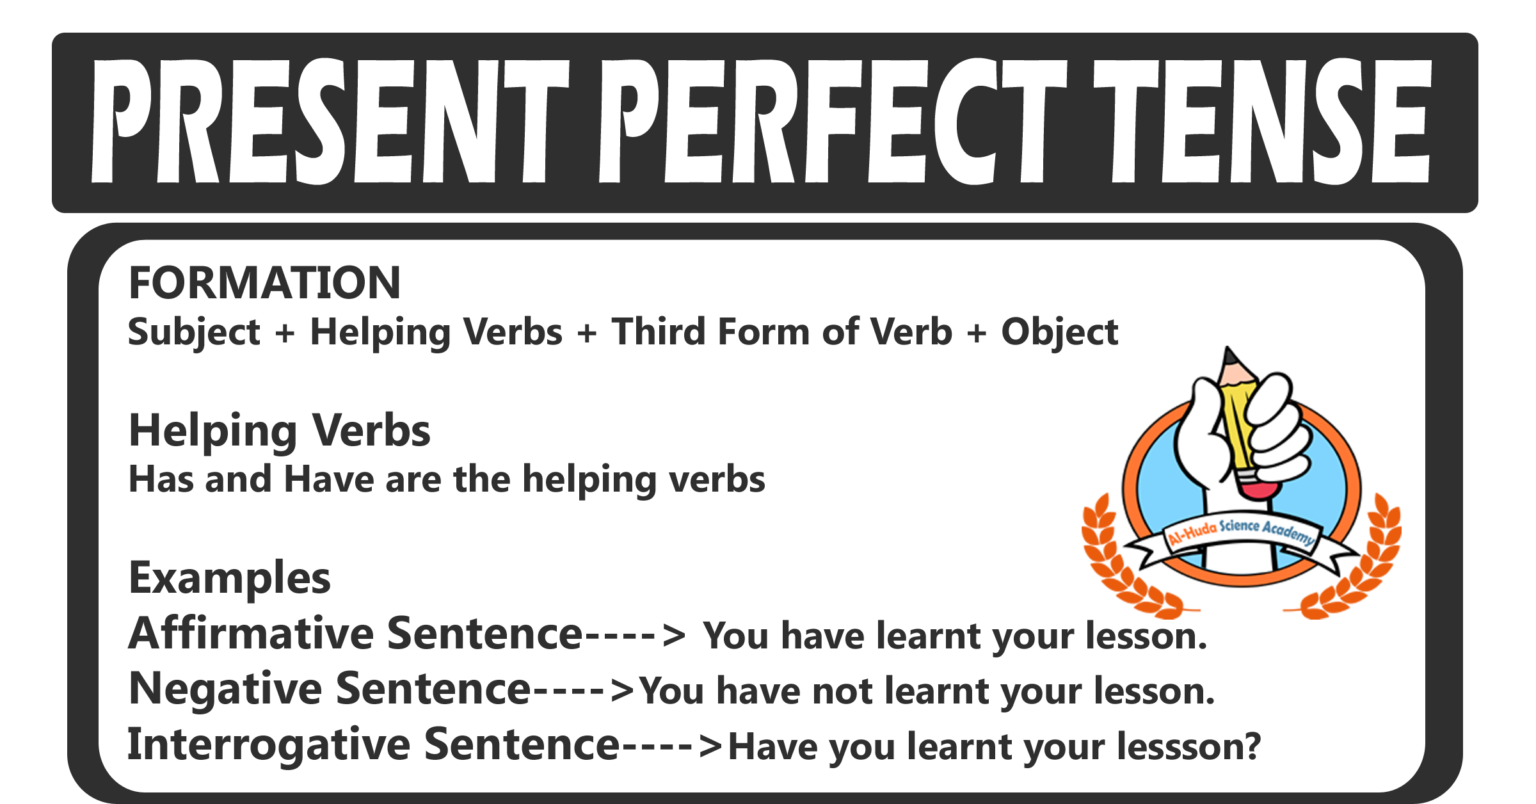 3-present-perfect-tense-tips-to-learn-tense-with-examples